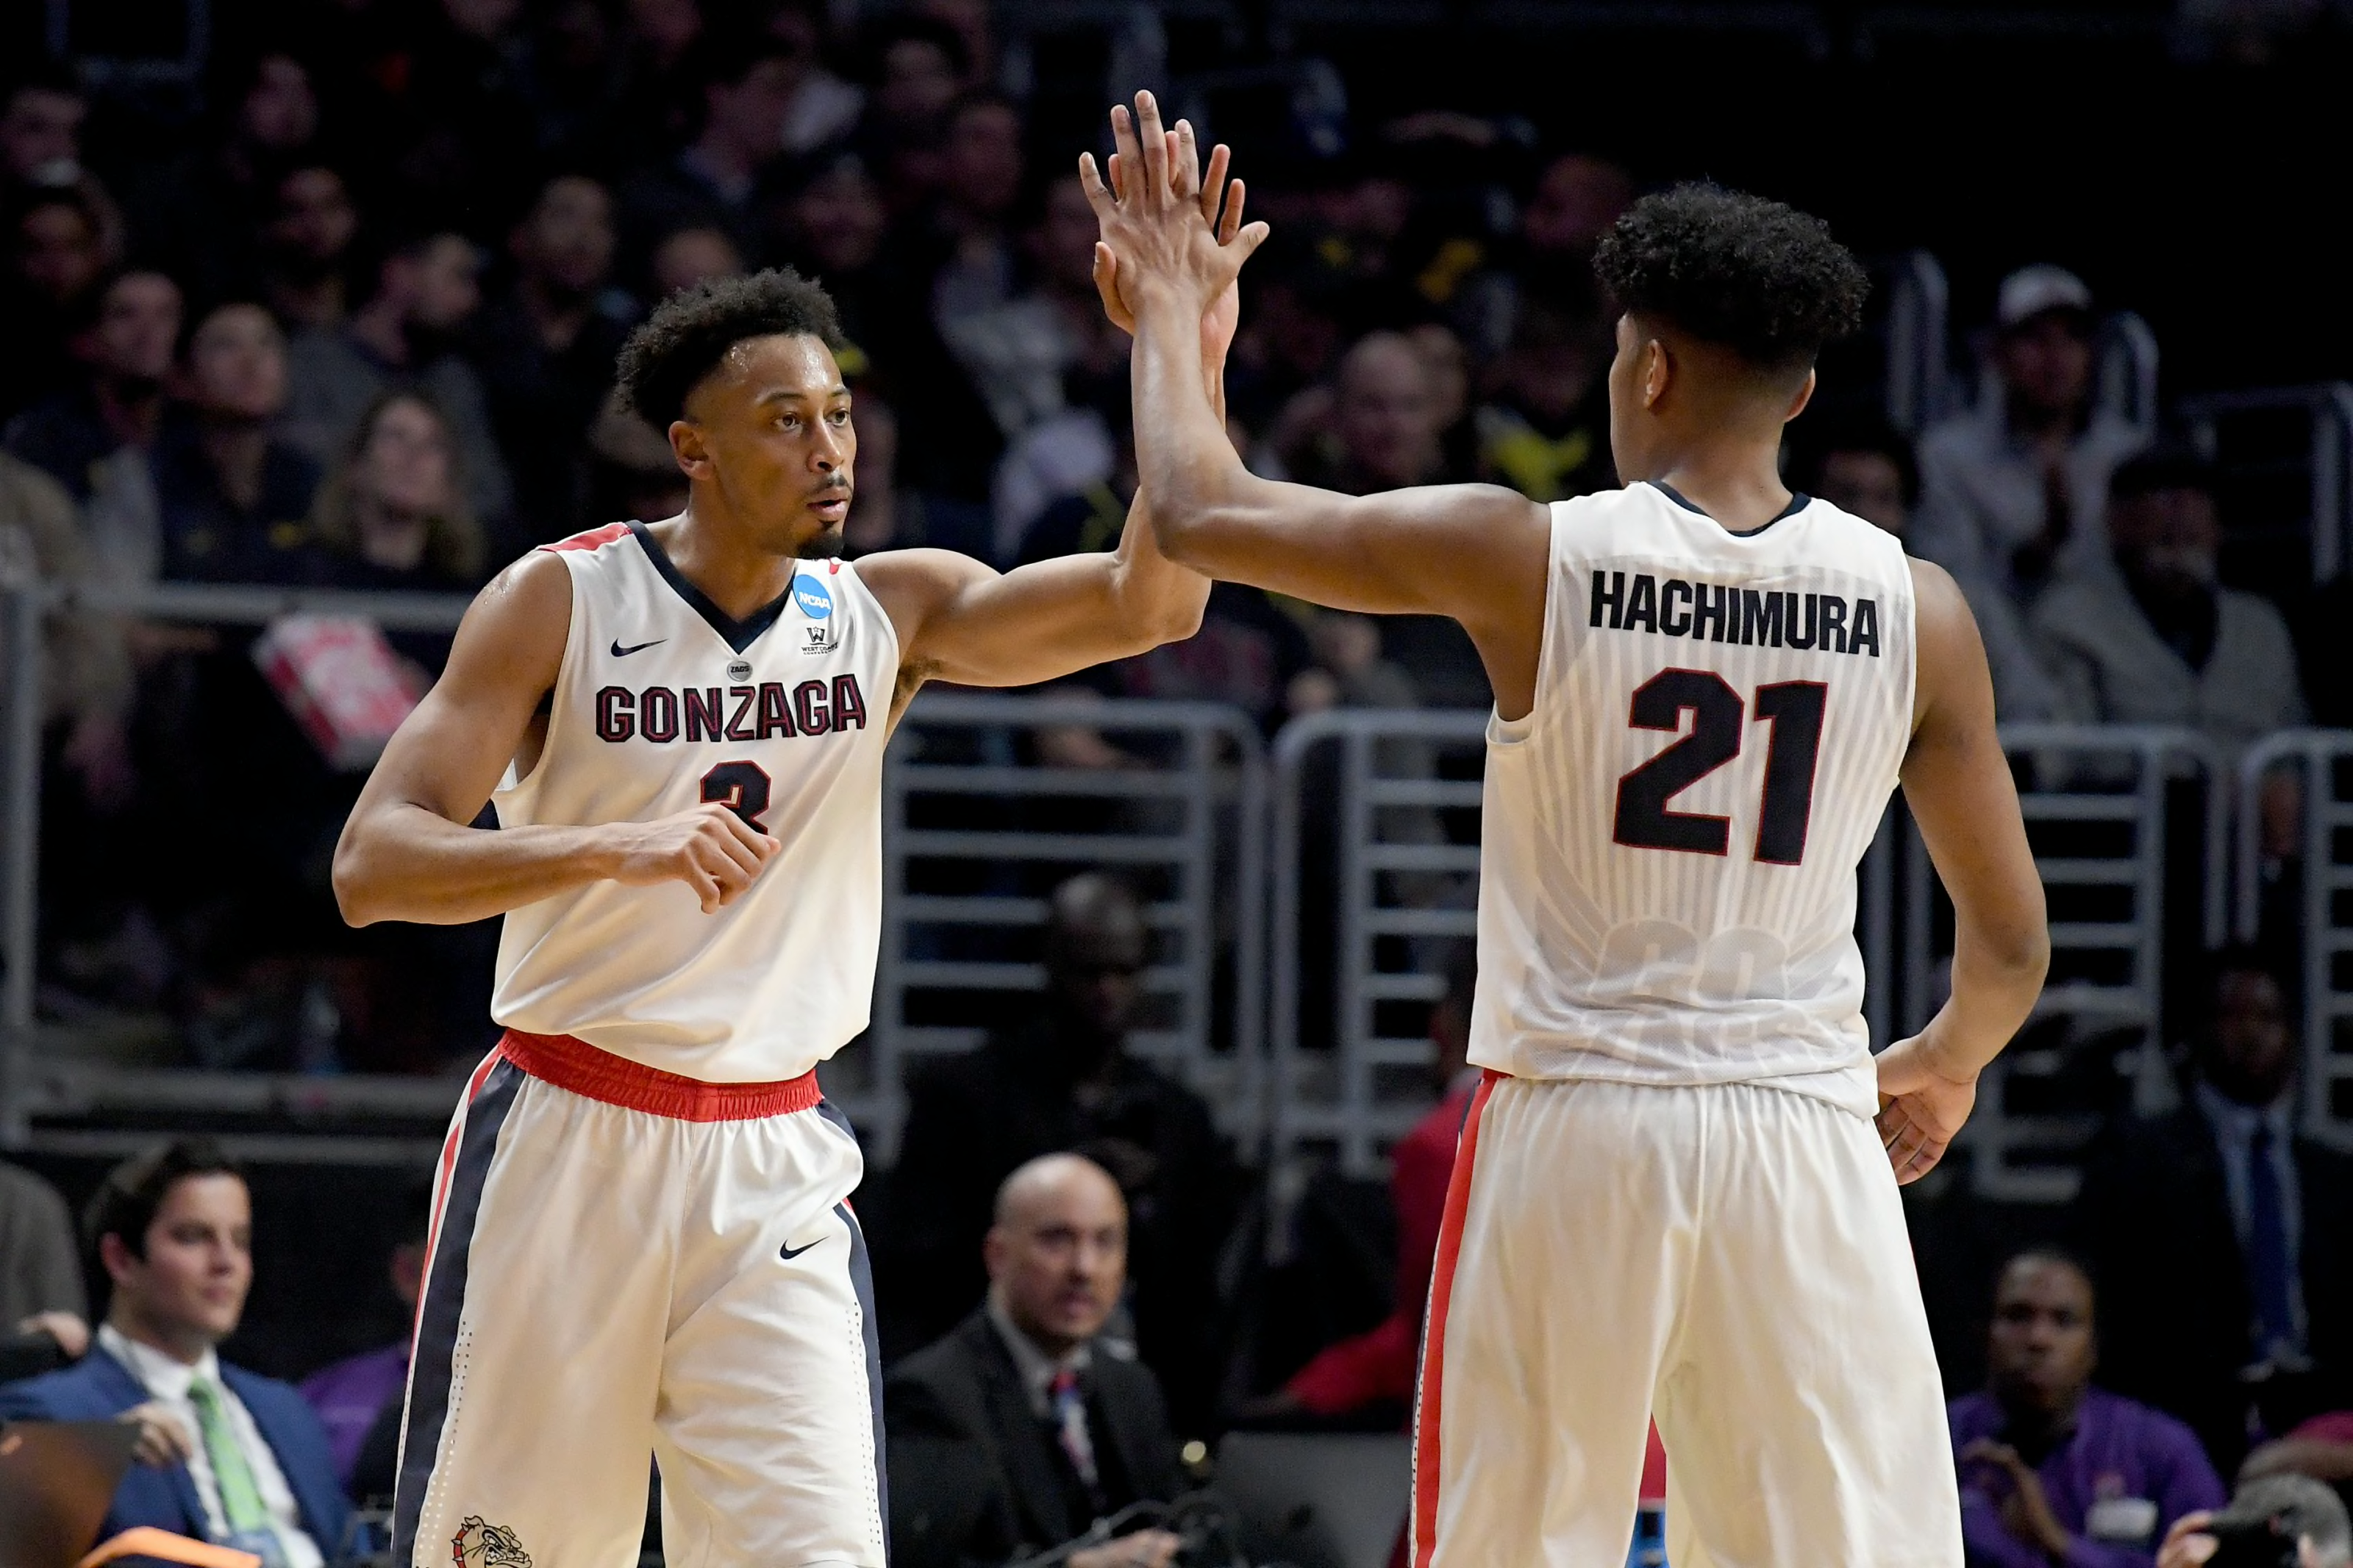 Gonzaga's Rui Hachimura drops 21 points in First Round of NCAA tournament 